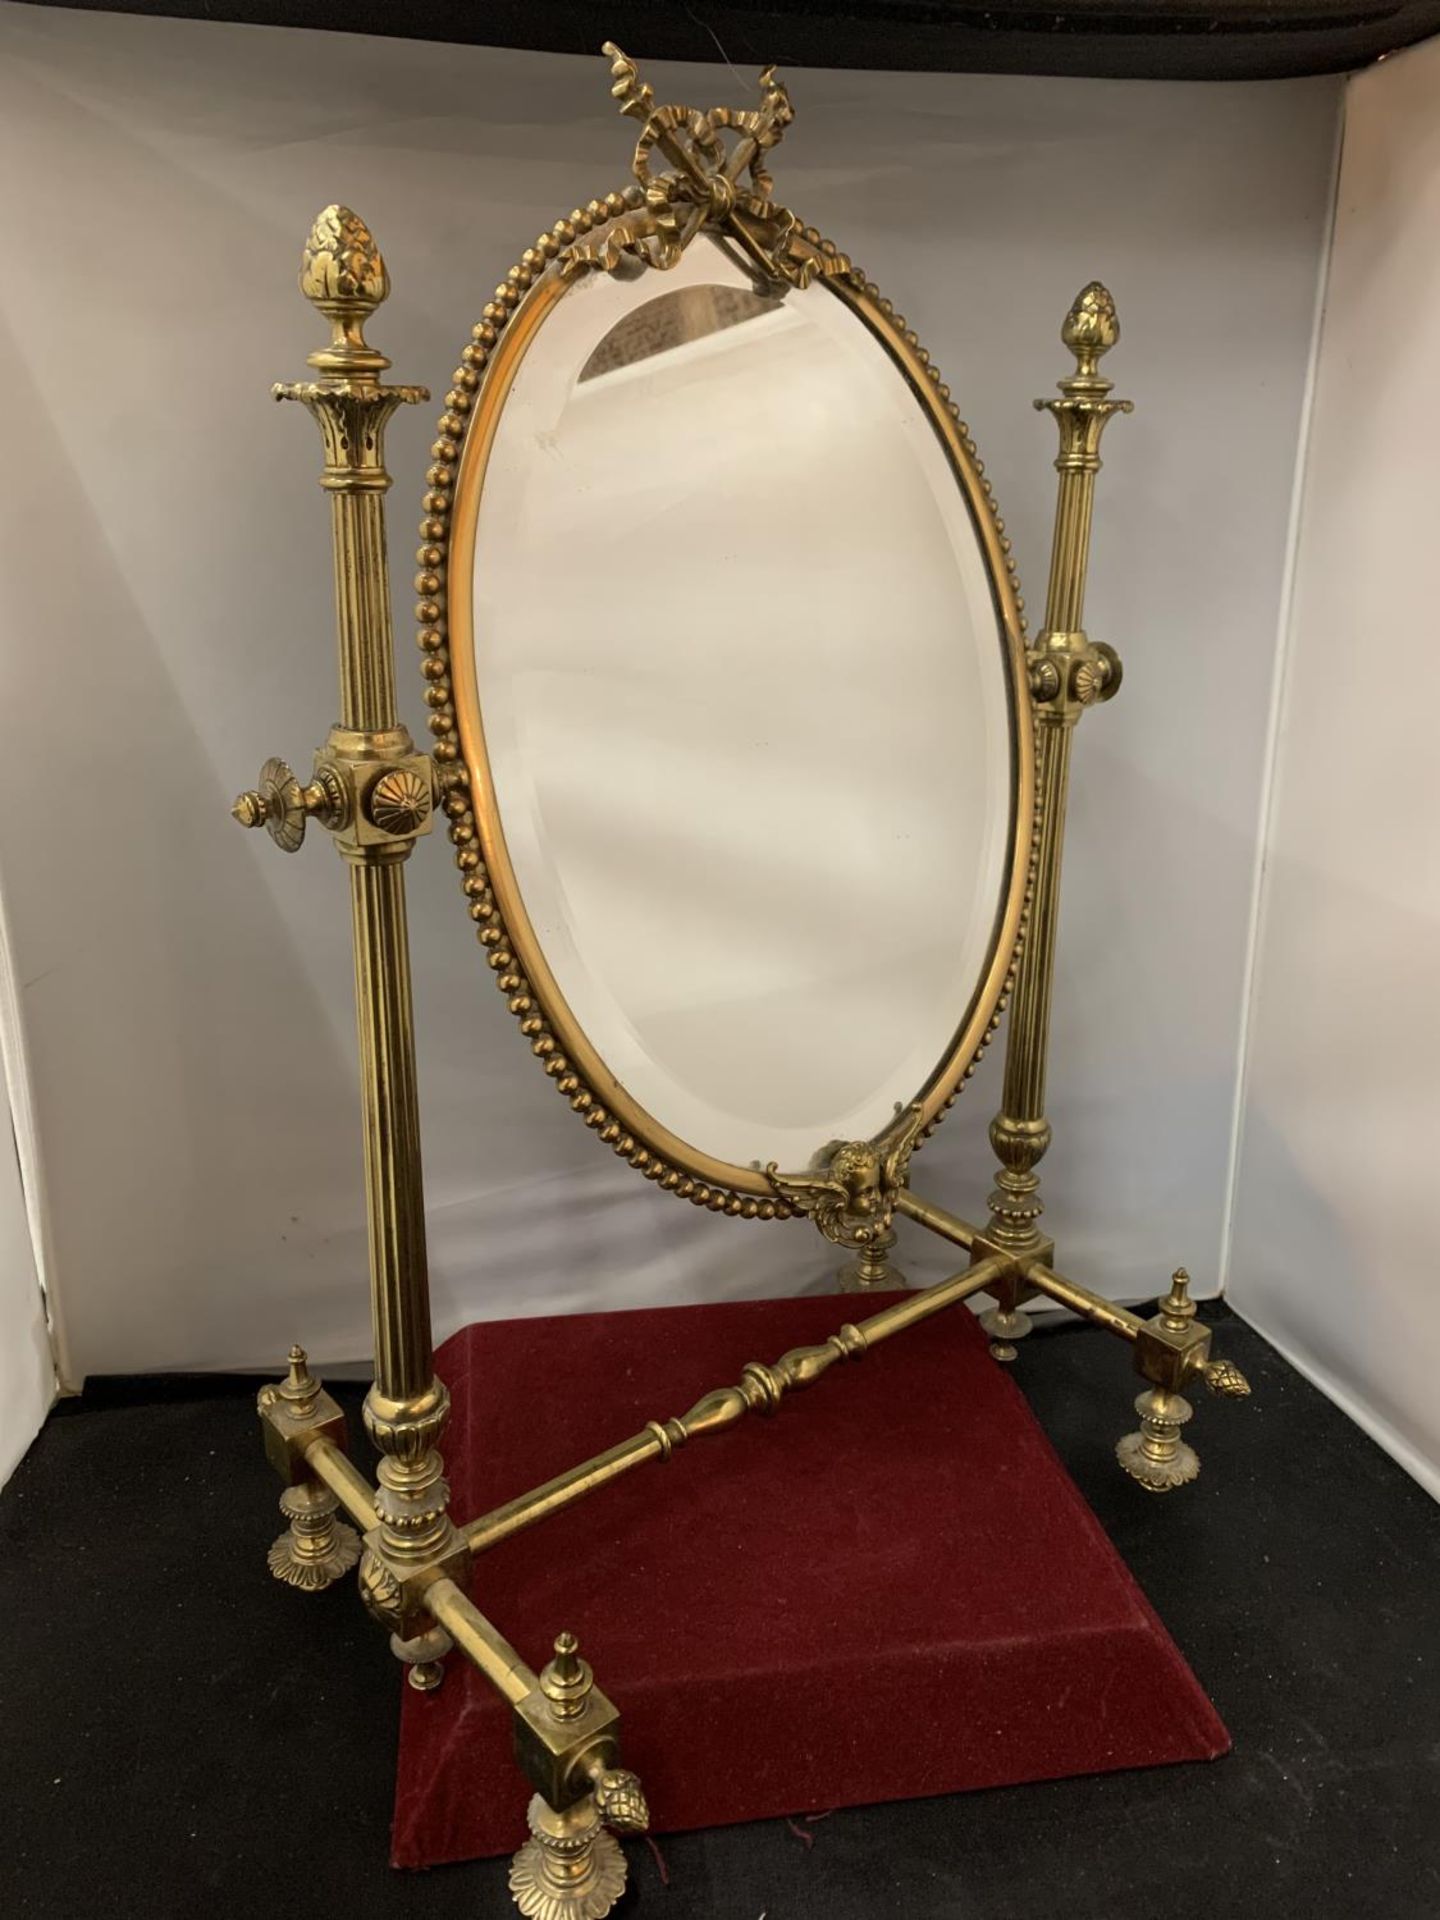 A DECORATIVE VINTAGE BRASS SWIVEL DRESSING TABLE MIRROR ON A STAND TOTAL H: 25CM - Image 2 of 4